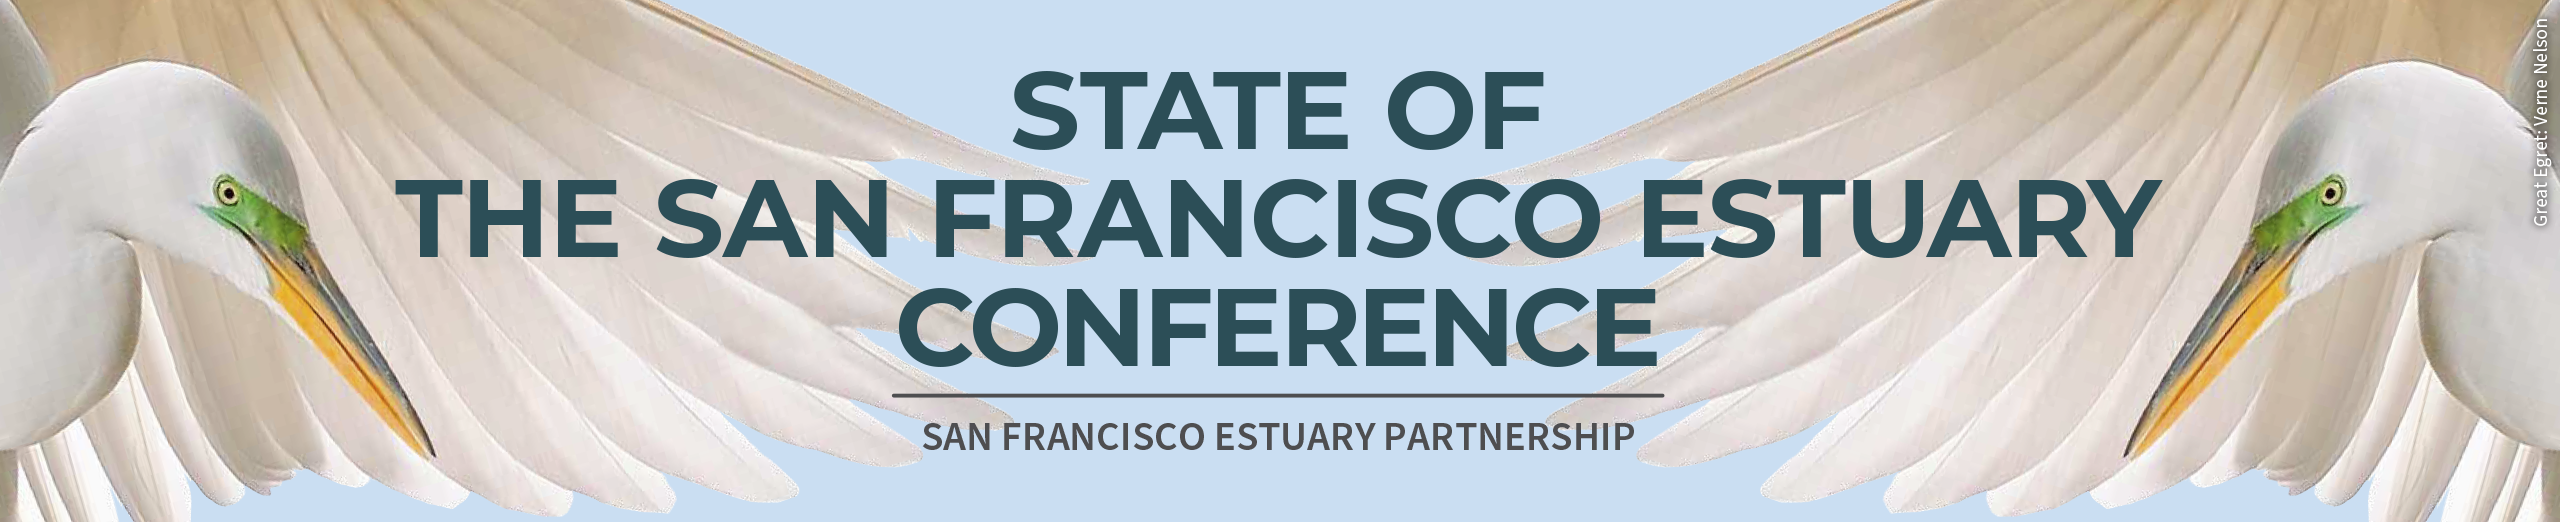 State of the Estuary Conference Banner